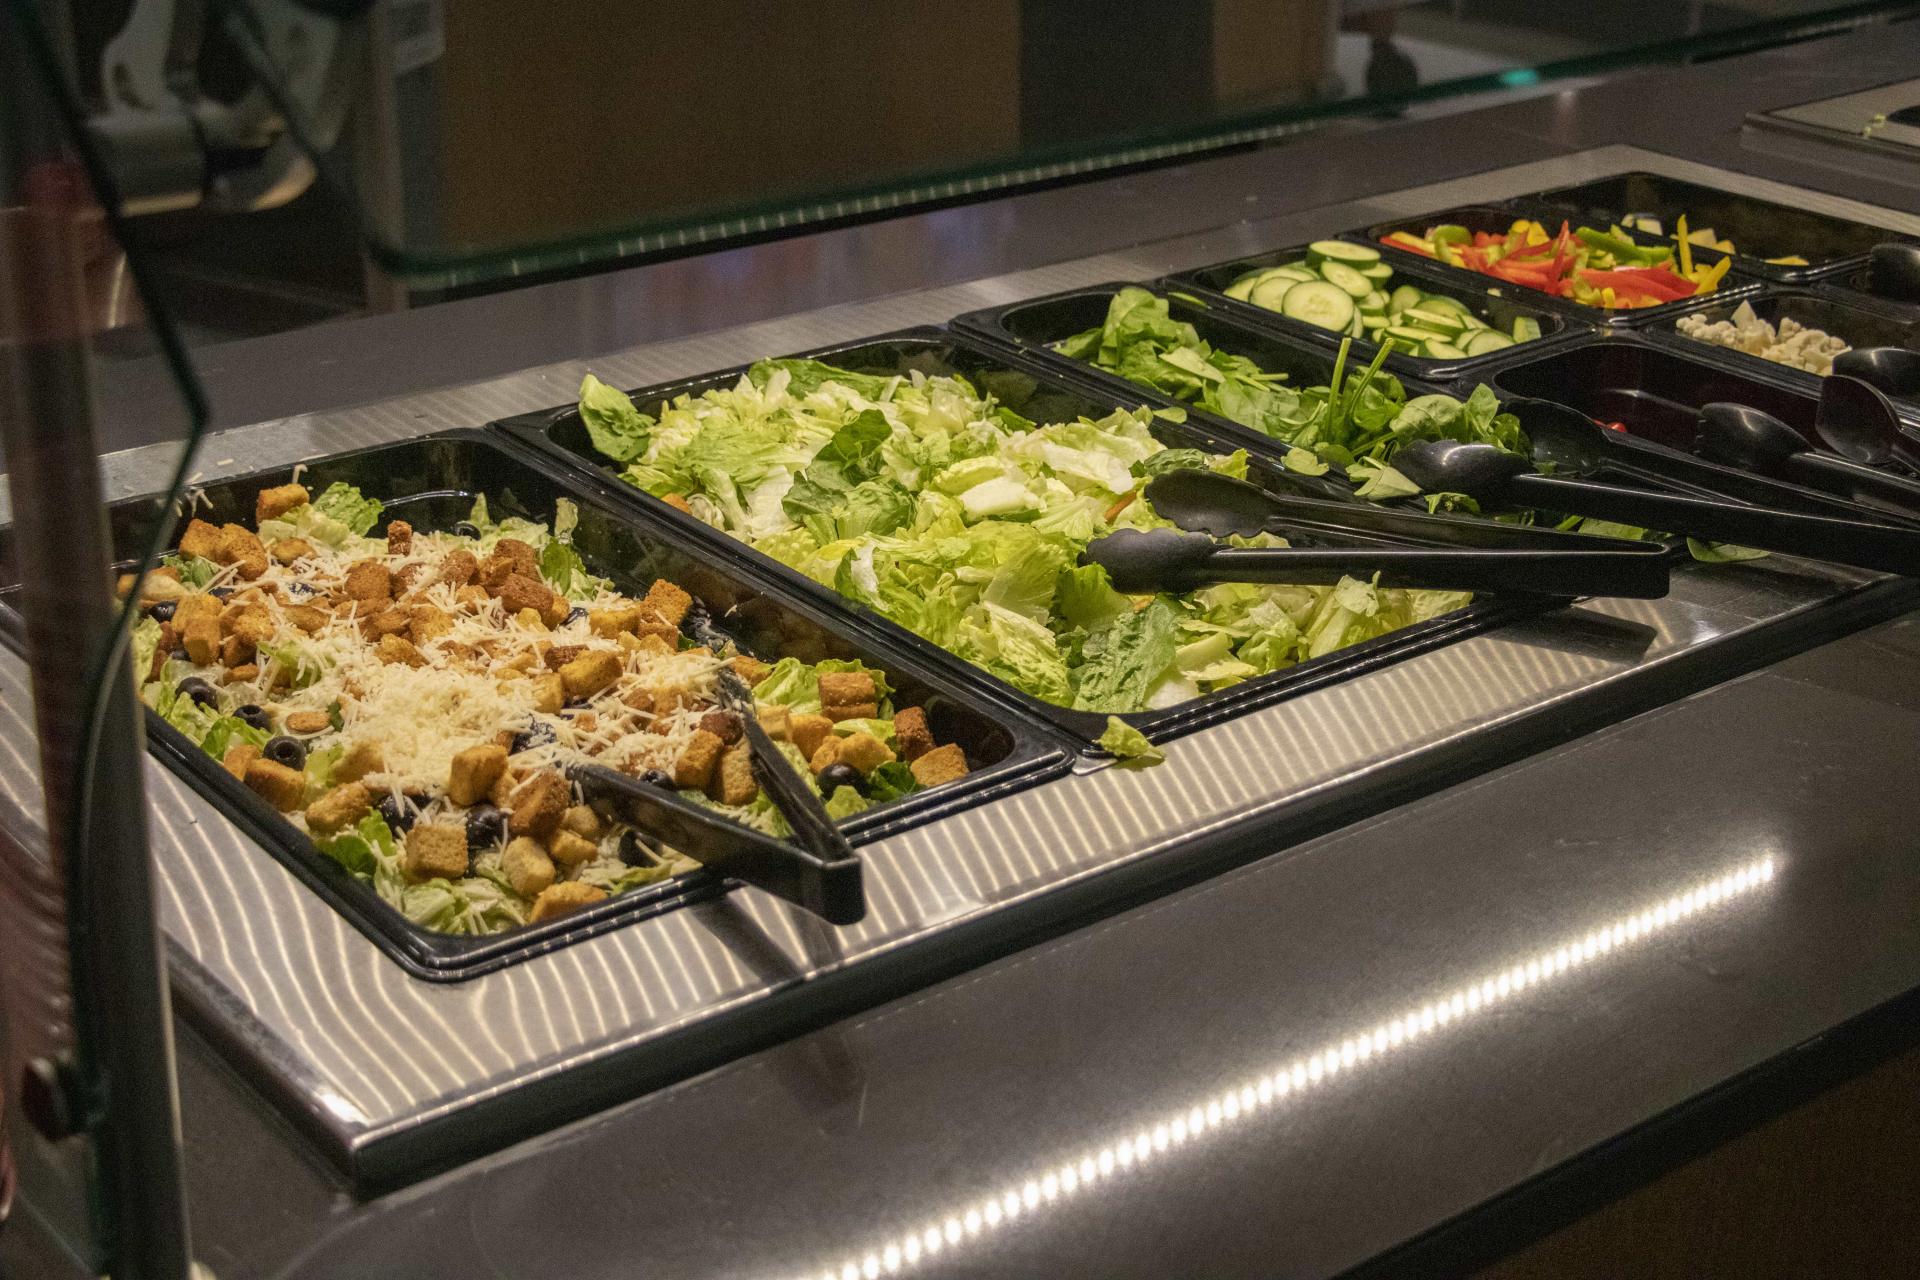 Selections on the all you care to eat salad bar at one of the dining centers